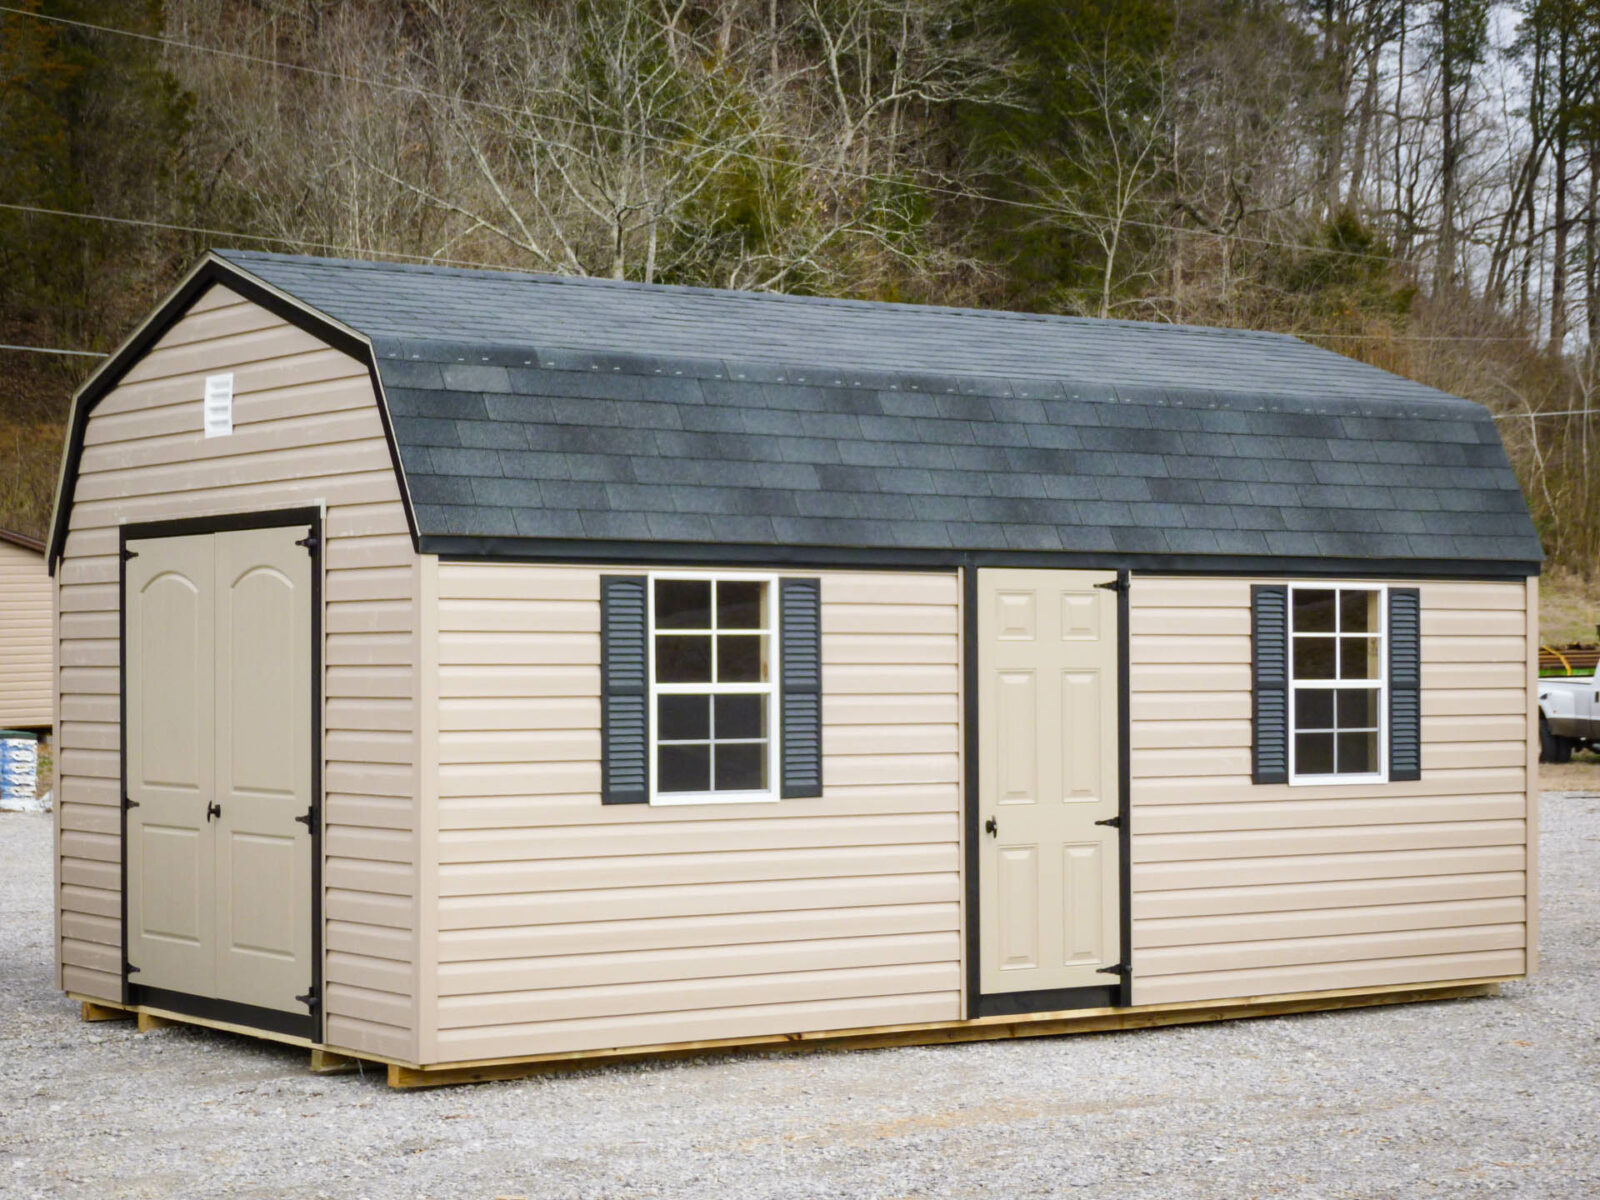 Vinyl Storage shed with windows